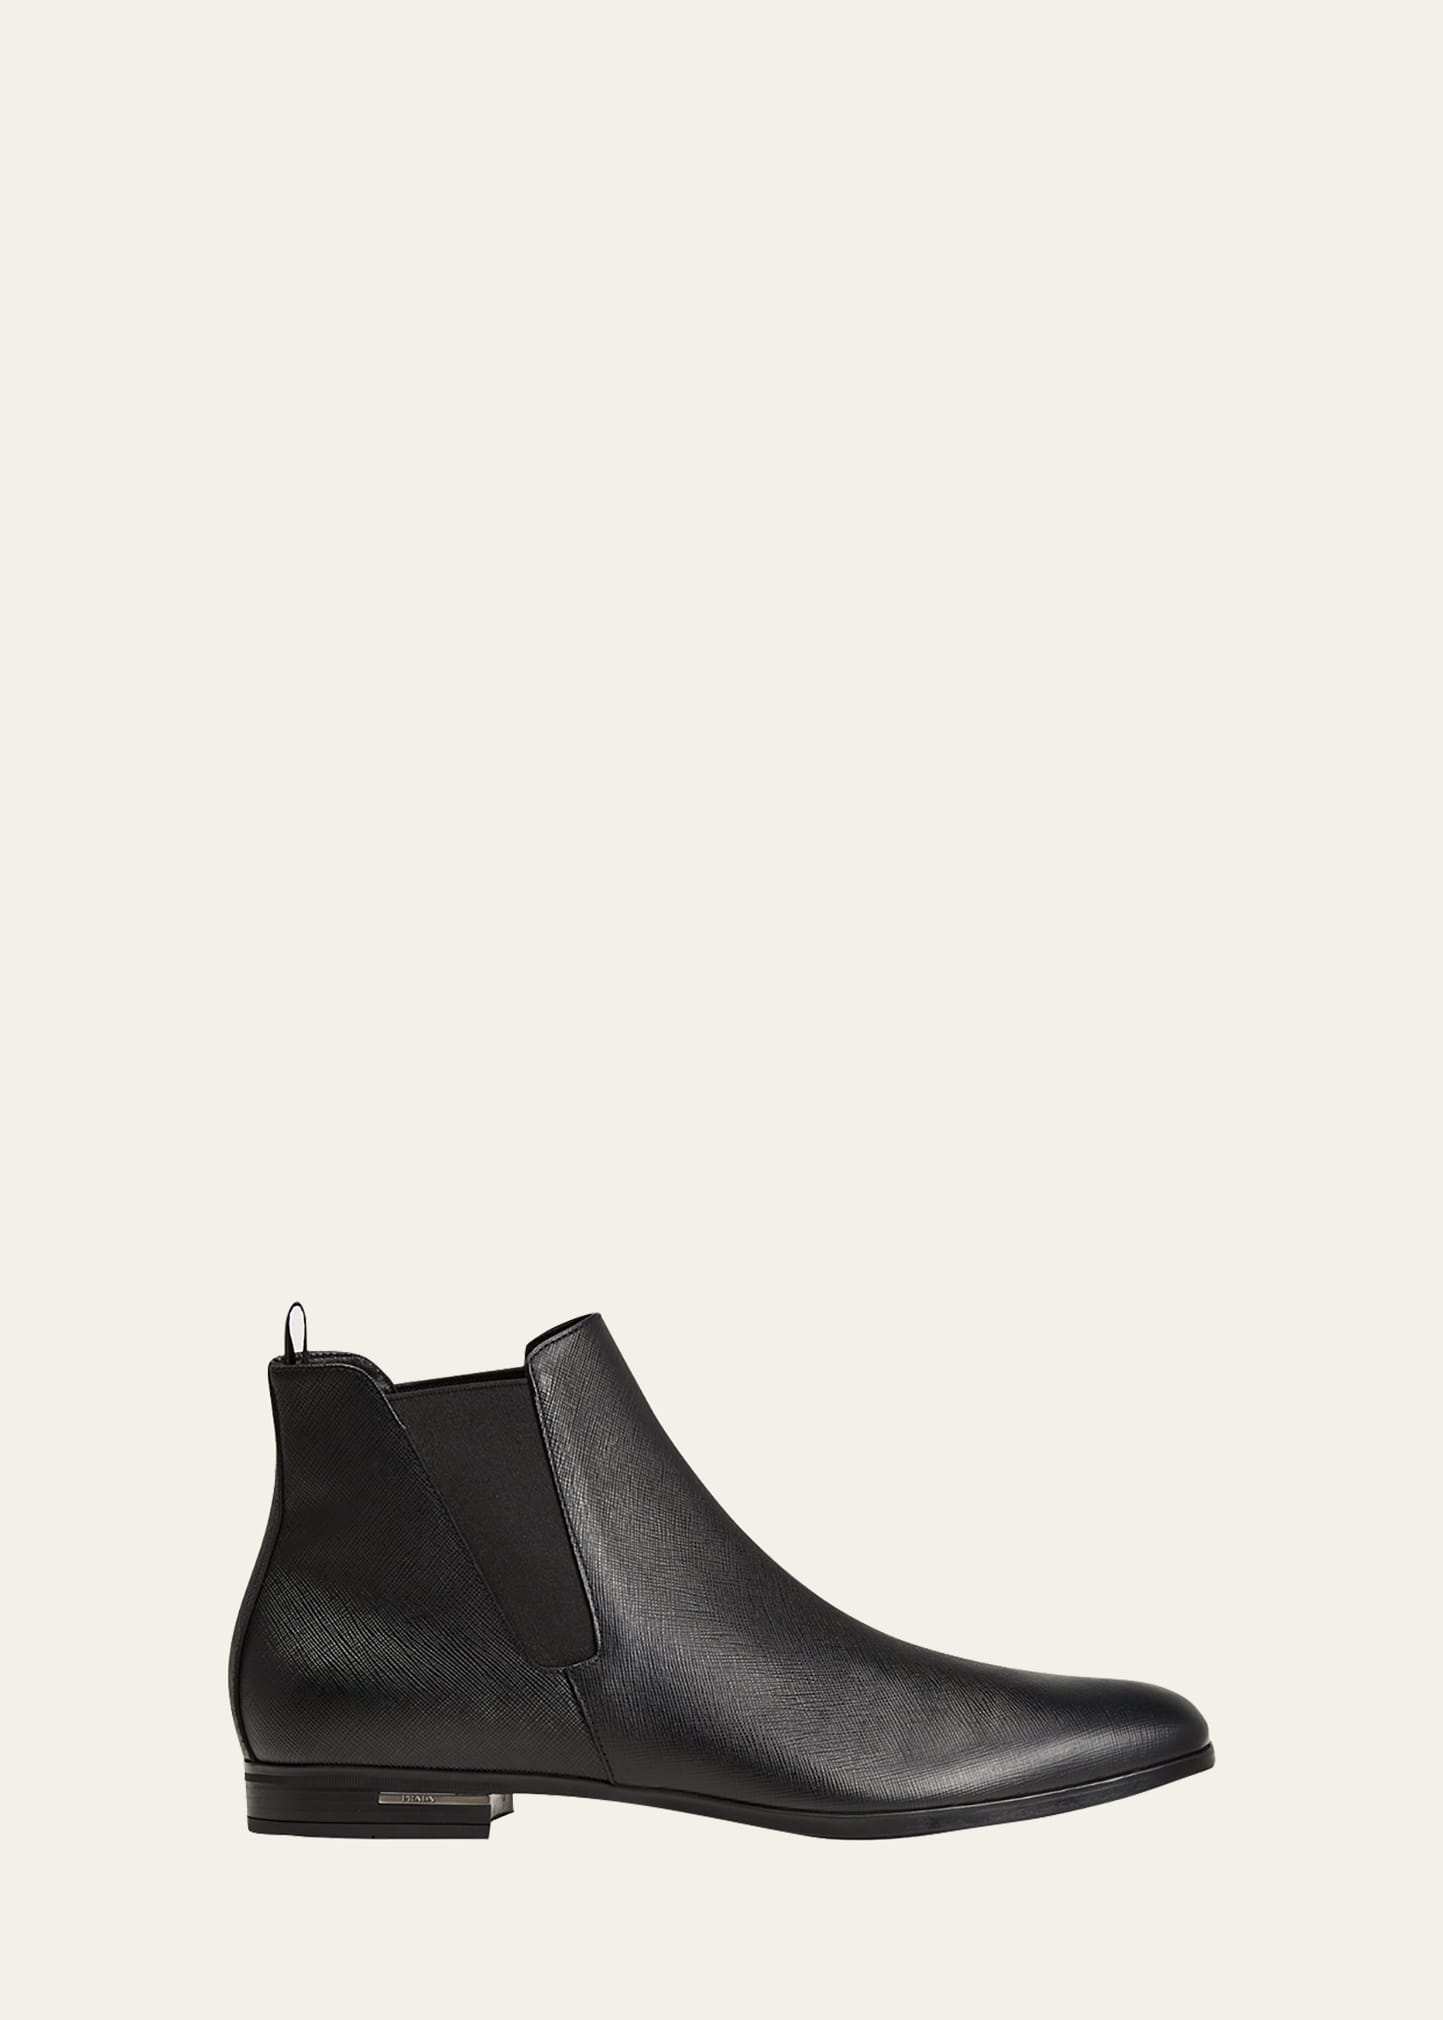 Saffiano Leather Chelsea Boots